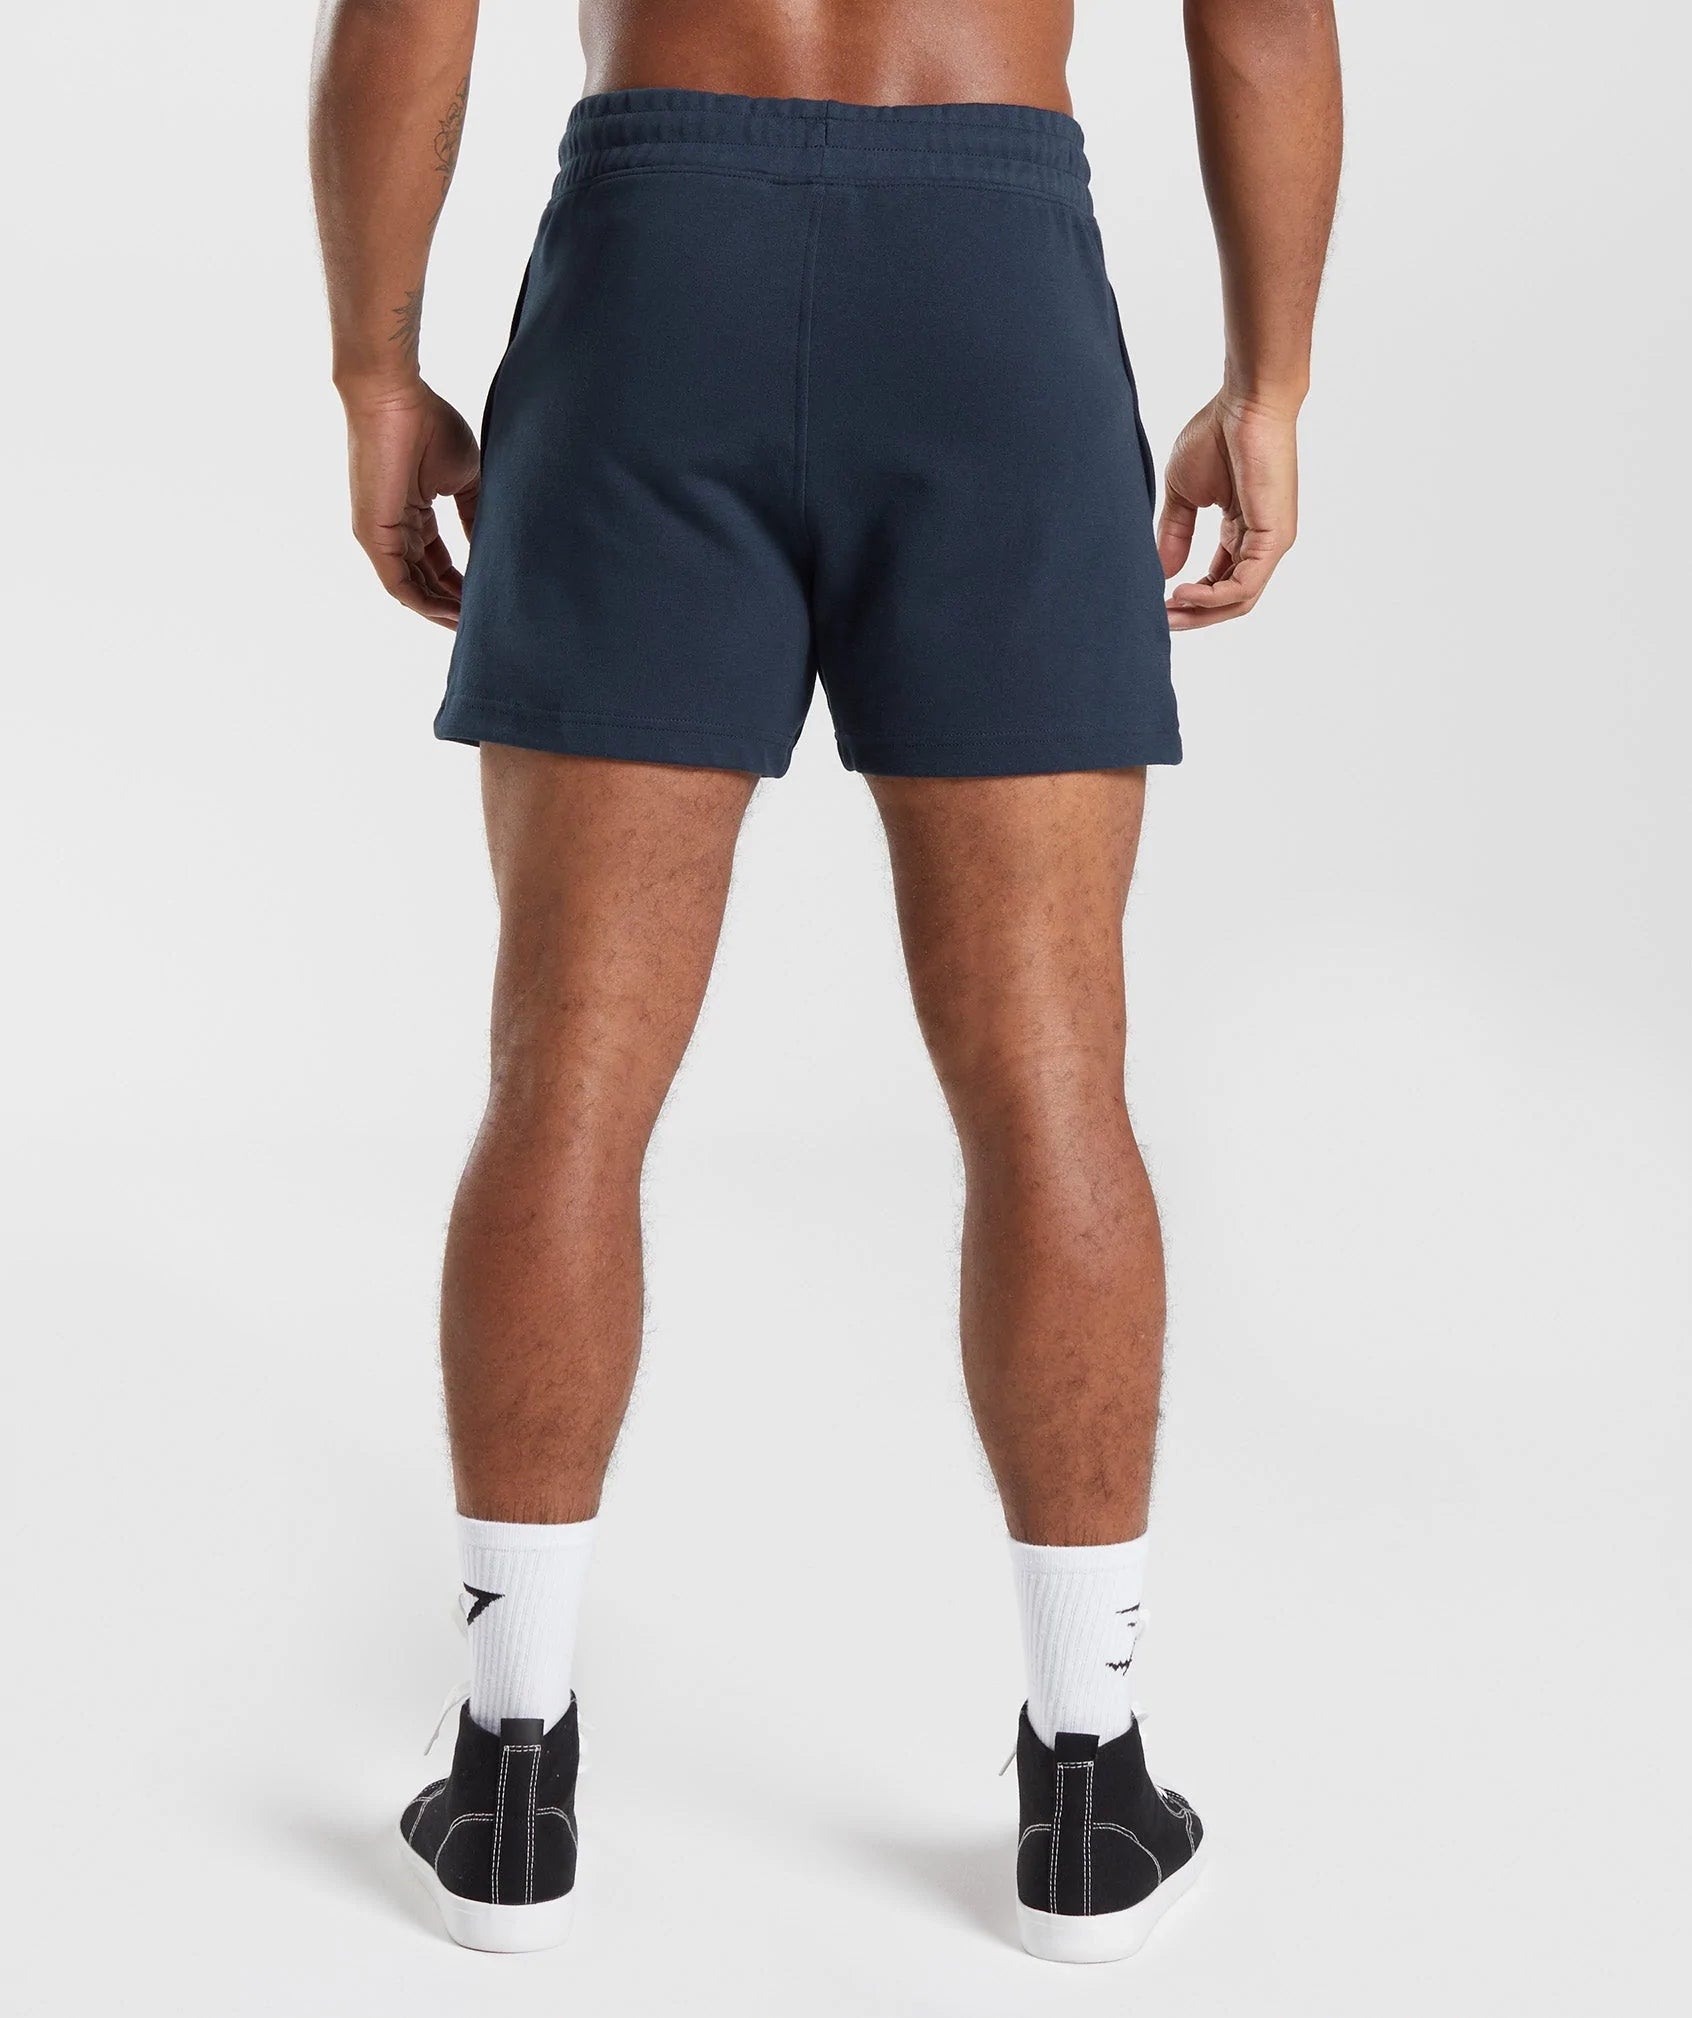 React 5" Shorts in Navy - view 2